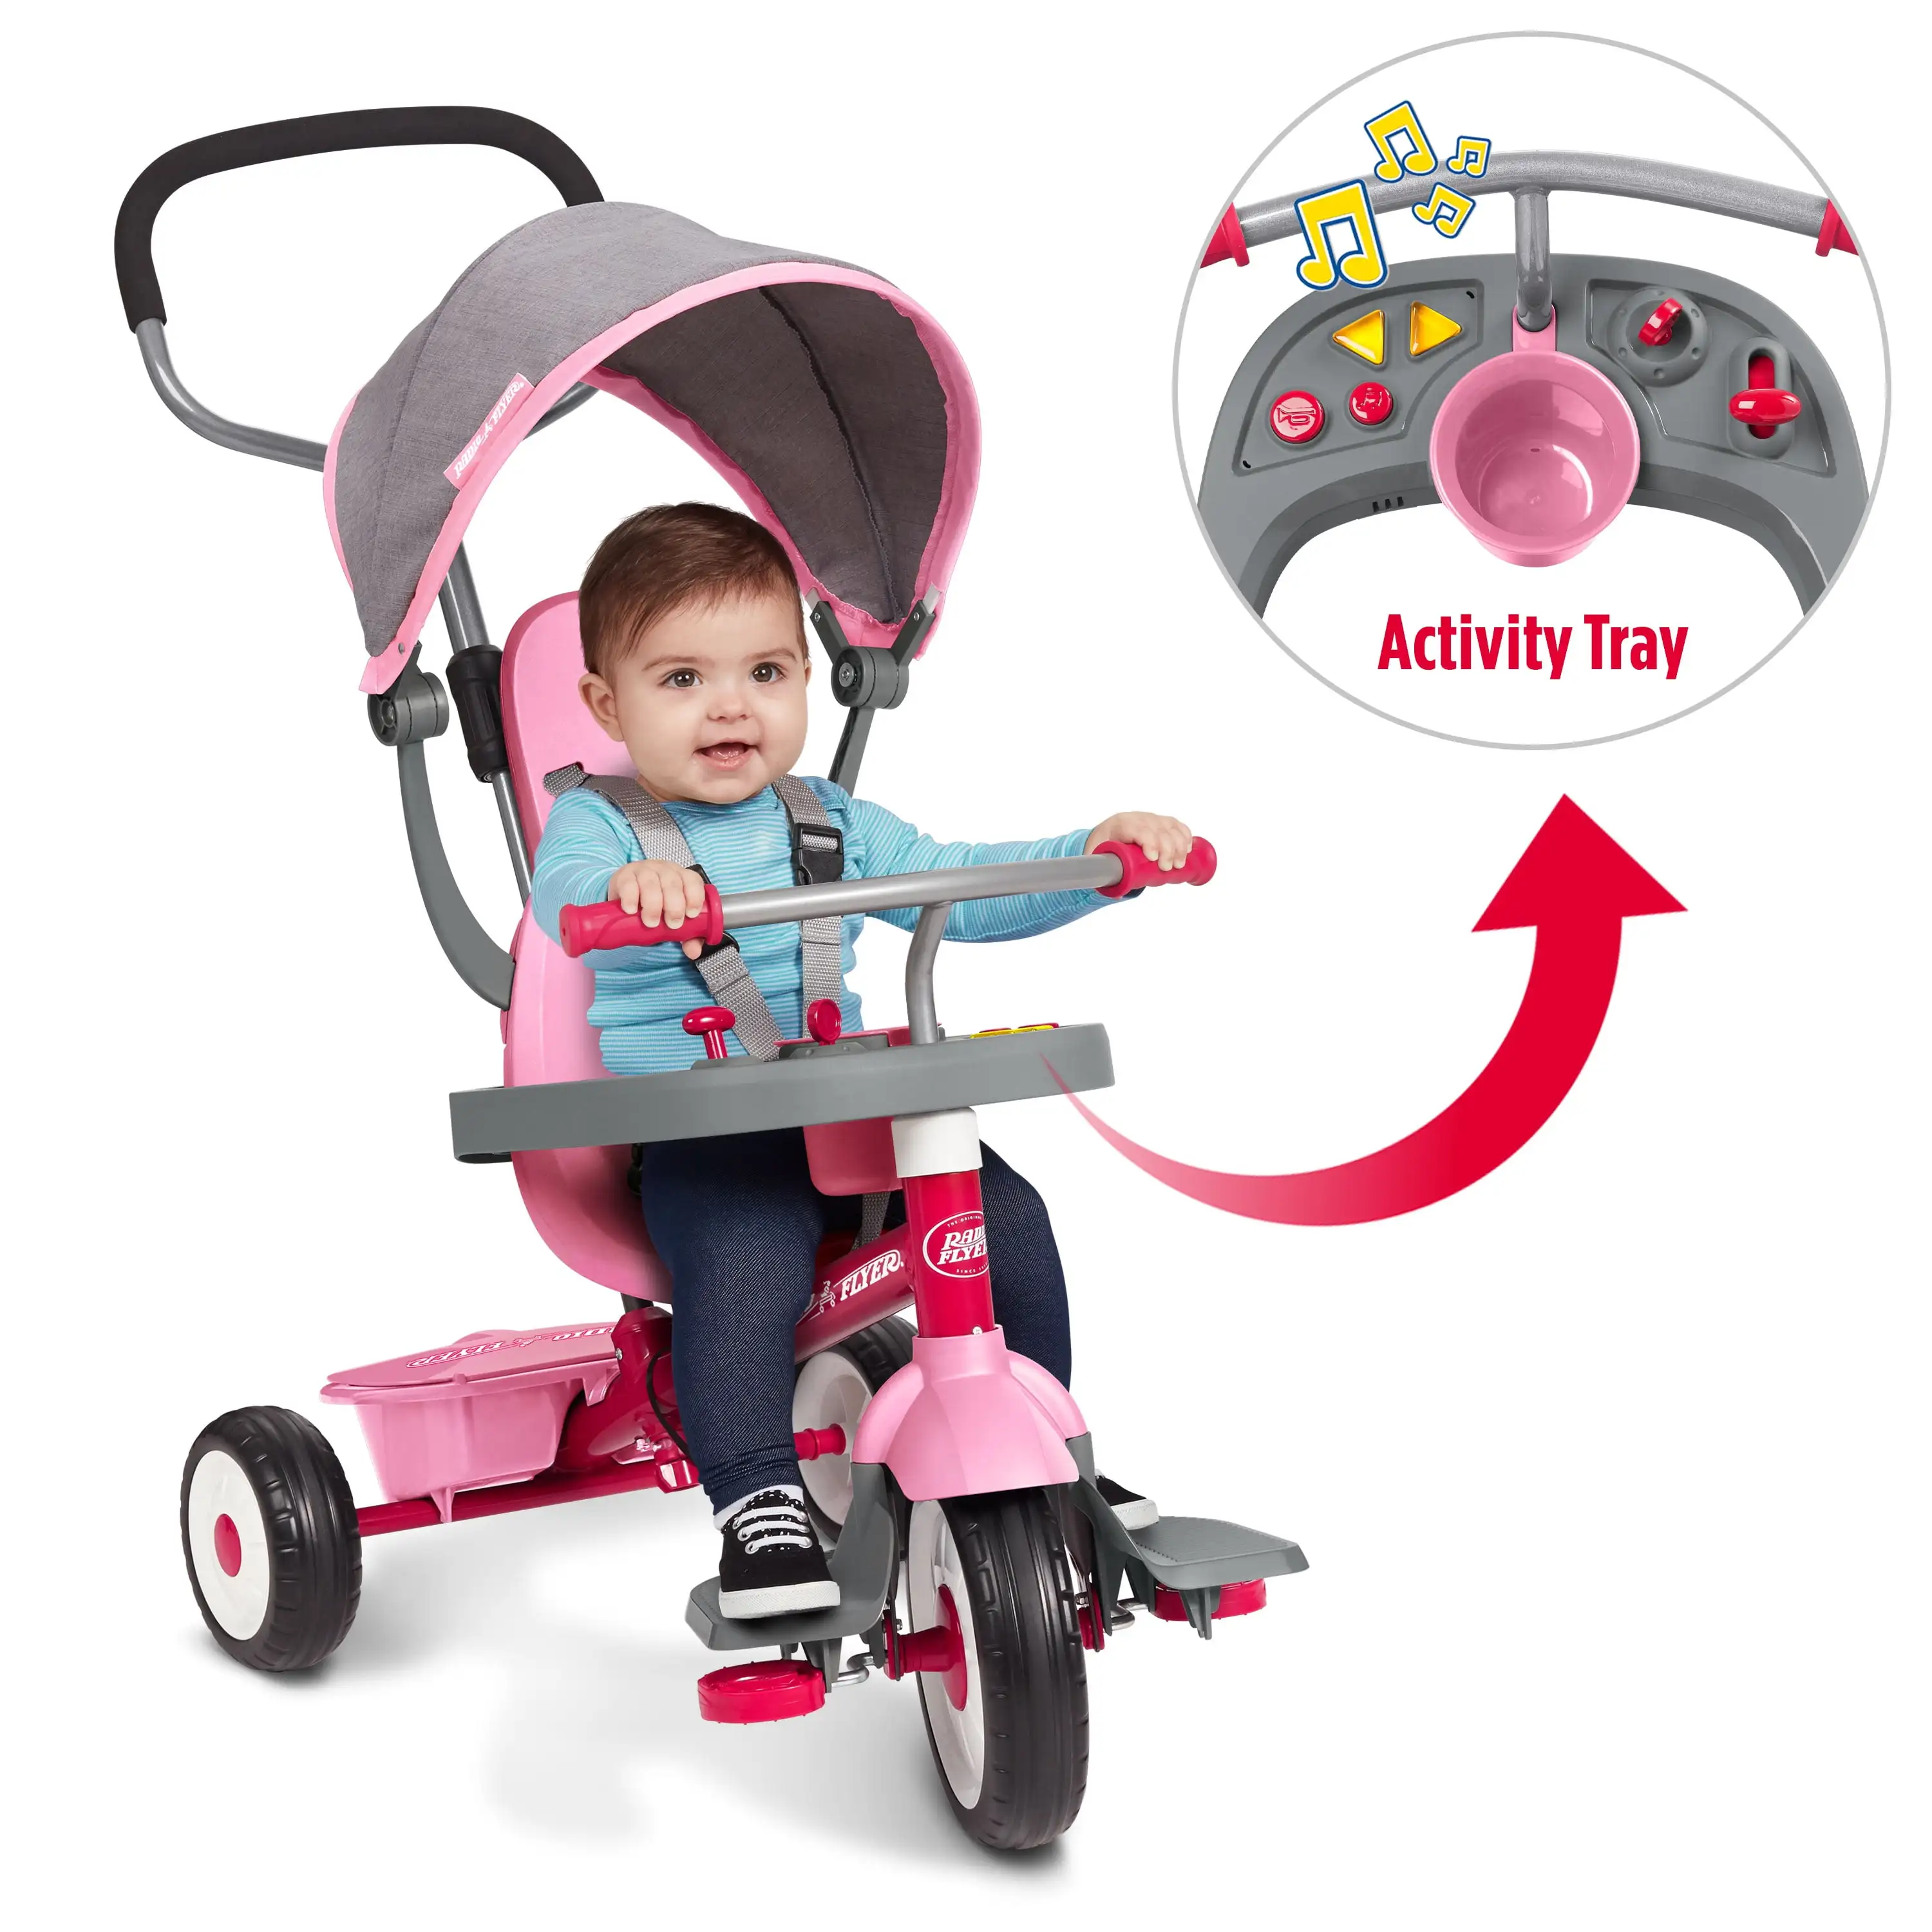 RD Flyer 4-in-1 Stroll 'N Trike with Activity Tray - Pink & Gray